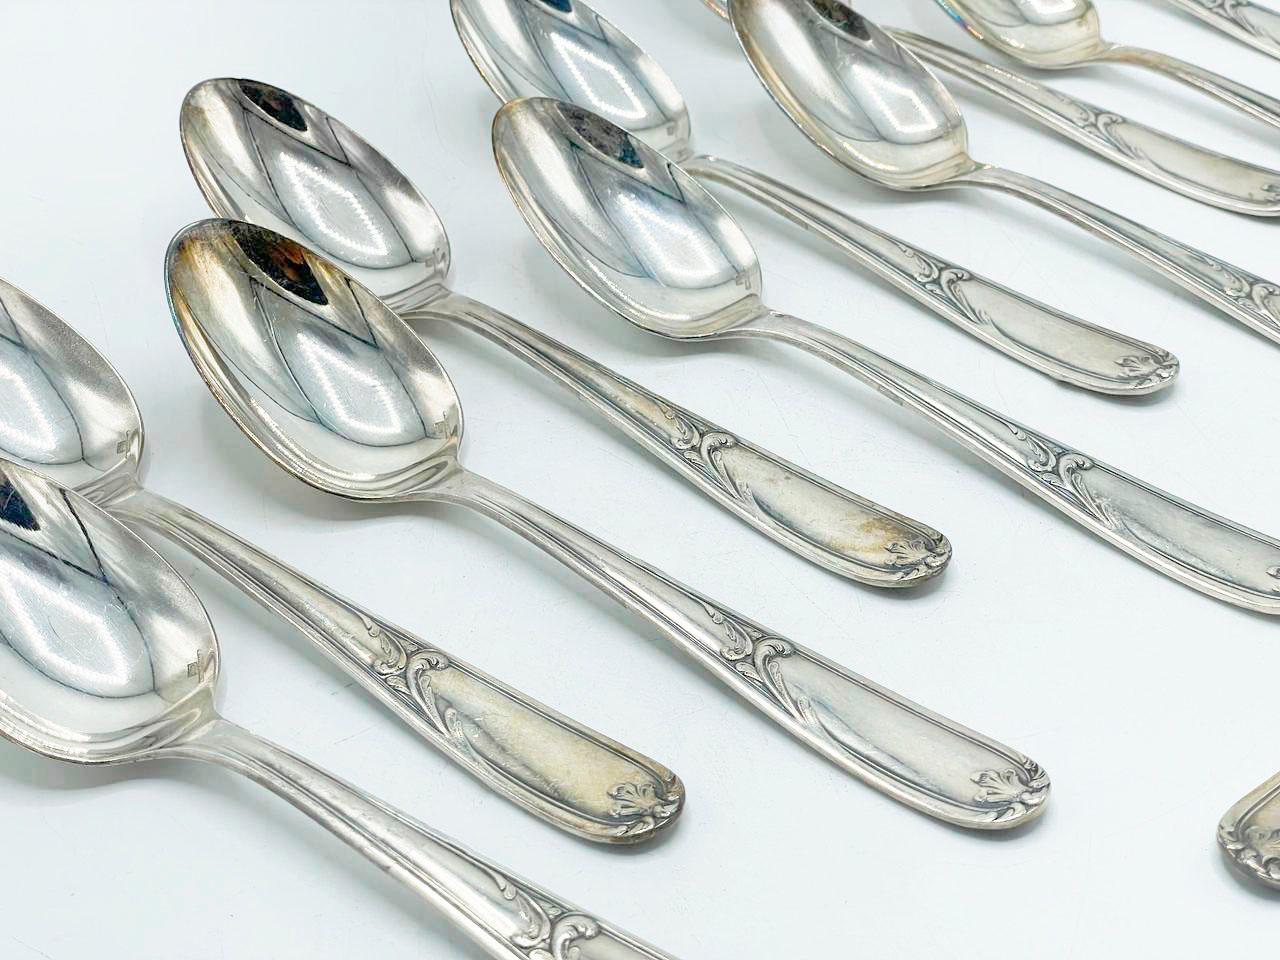 Christofle Made in Argentina, Flatware art nouveau in Silverplated For Sale 3